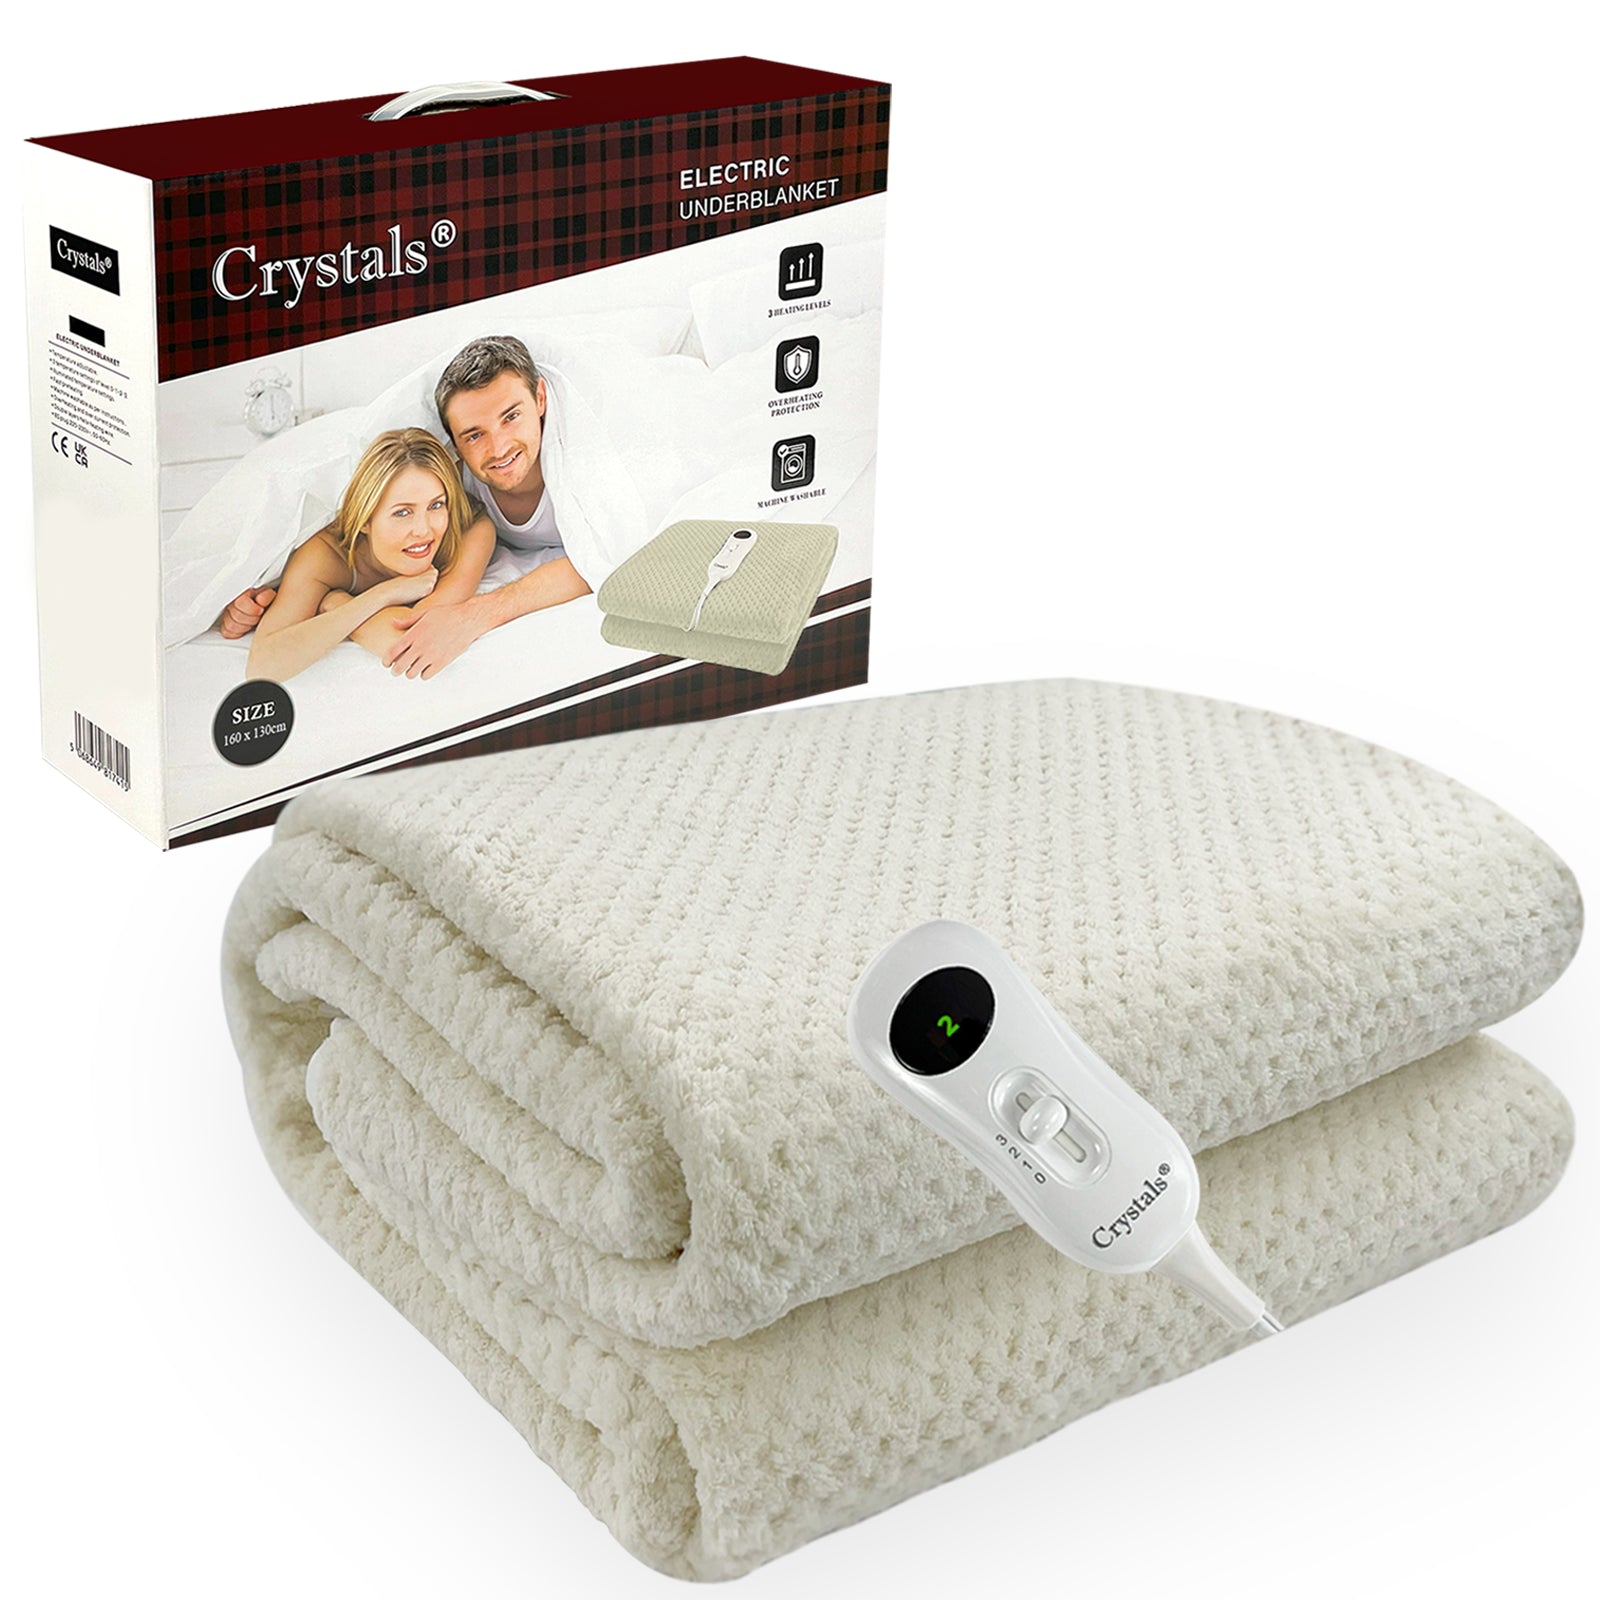 Electric Heated under Blanket Comfort Control Fast Heat up Cosy Warm Washable